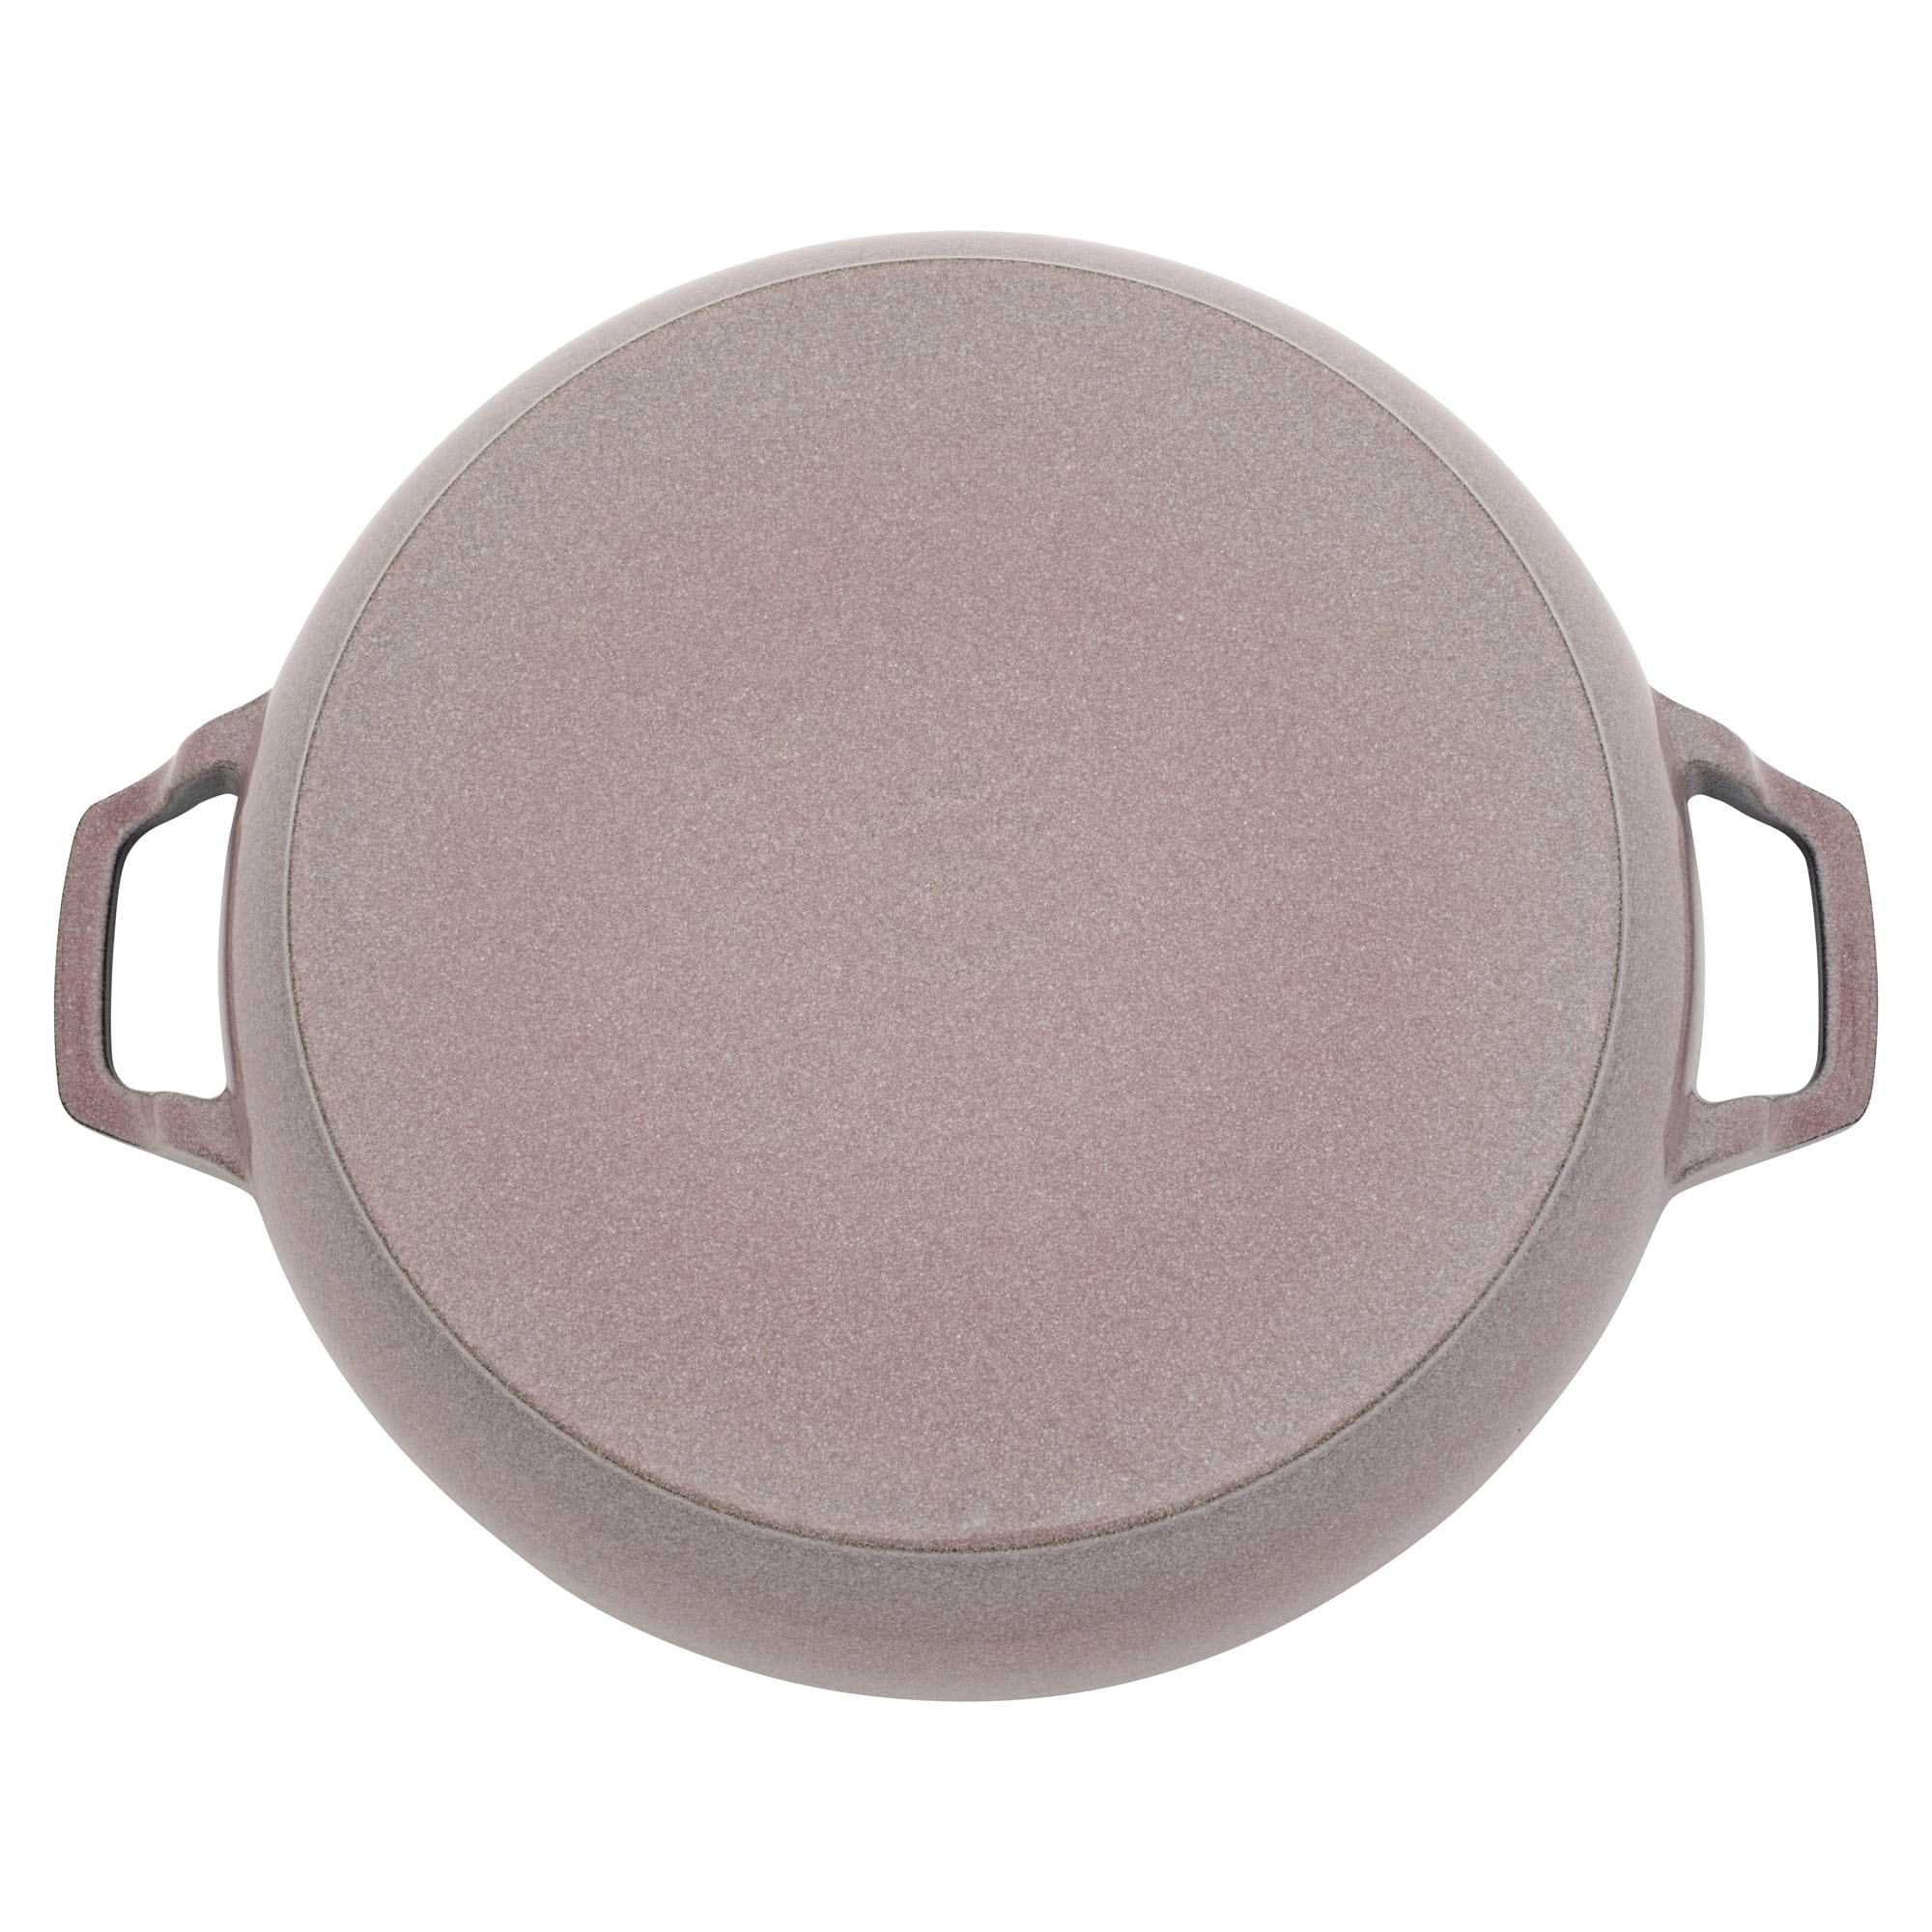 https://ak1.ostkcdn.com/images/products/is/images/direct/c7ca939d8c0f1585a62288c09d84ad6e64b5e8b4/STAUB-Cast-Iron-3.5-qt-Braiser-with-Glass-Lid.jpg